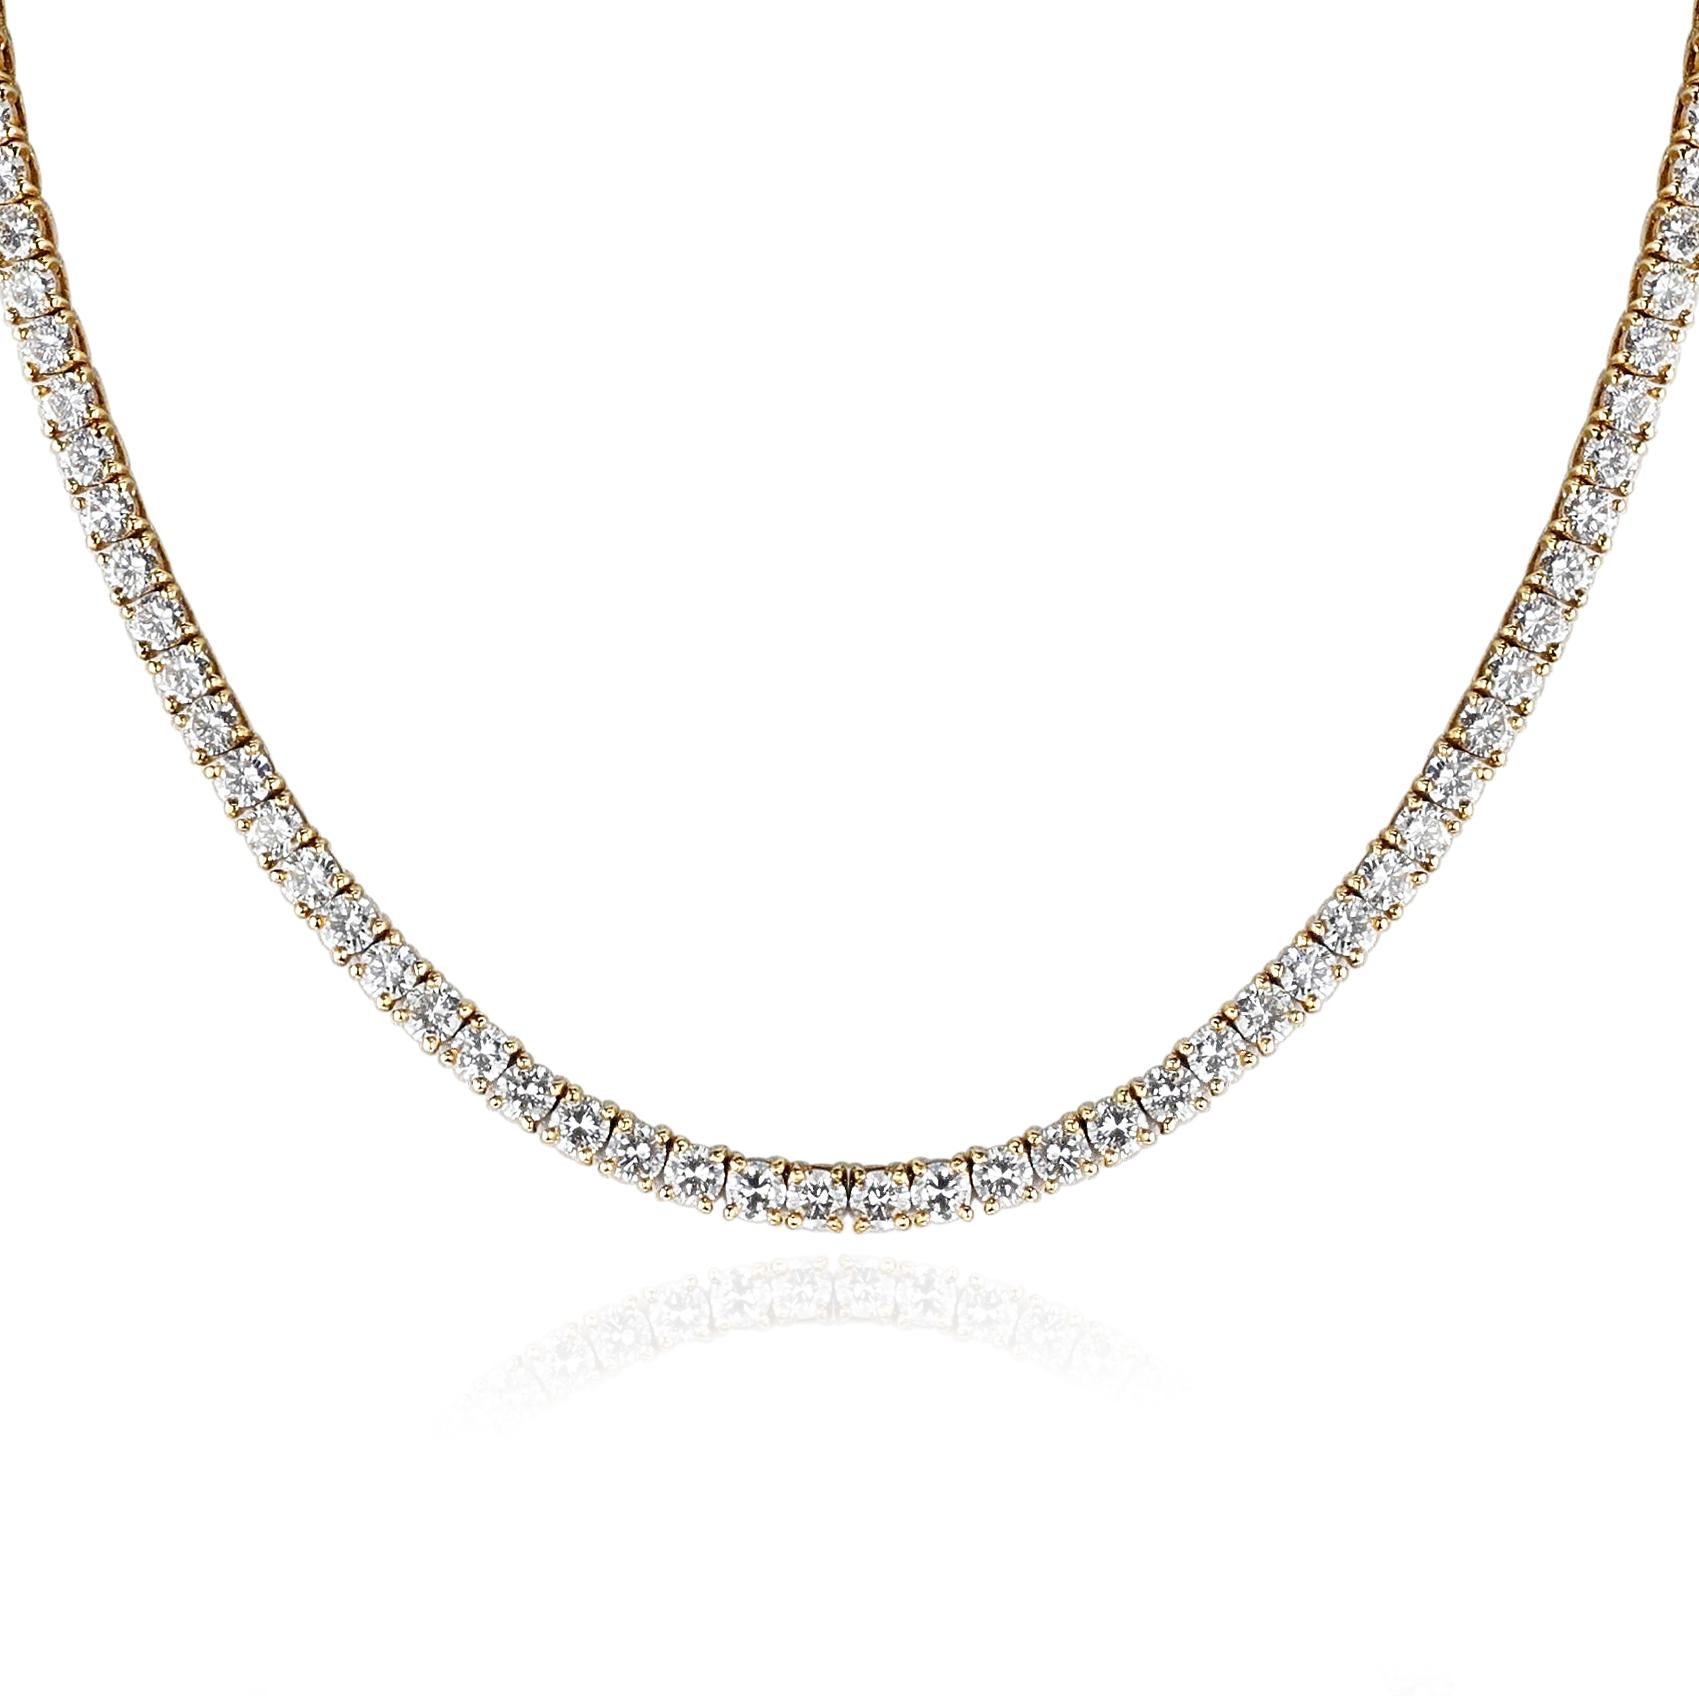 Cartier 17 ct.  Diamond Tennis Necklace, 18k Yellow Gold In Excellent Condition For Sale In New York, NY